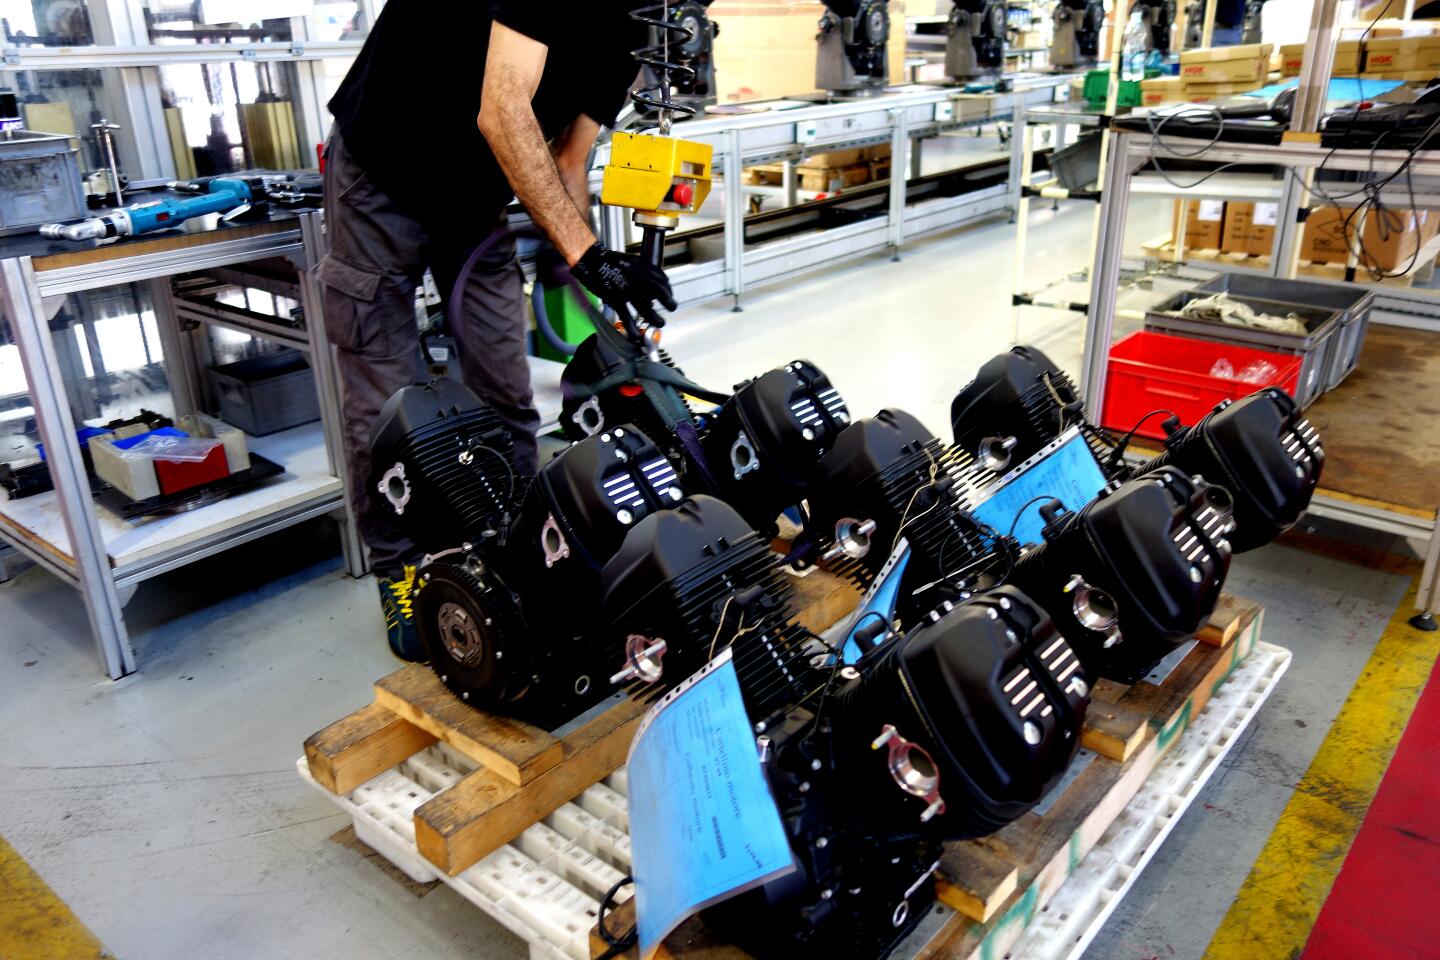 Engines are seen prior to assembly at the Moto Guzzi factory in Mandello Del Lario, Italy.